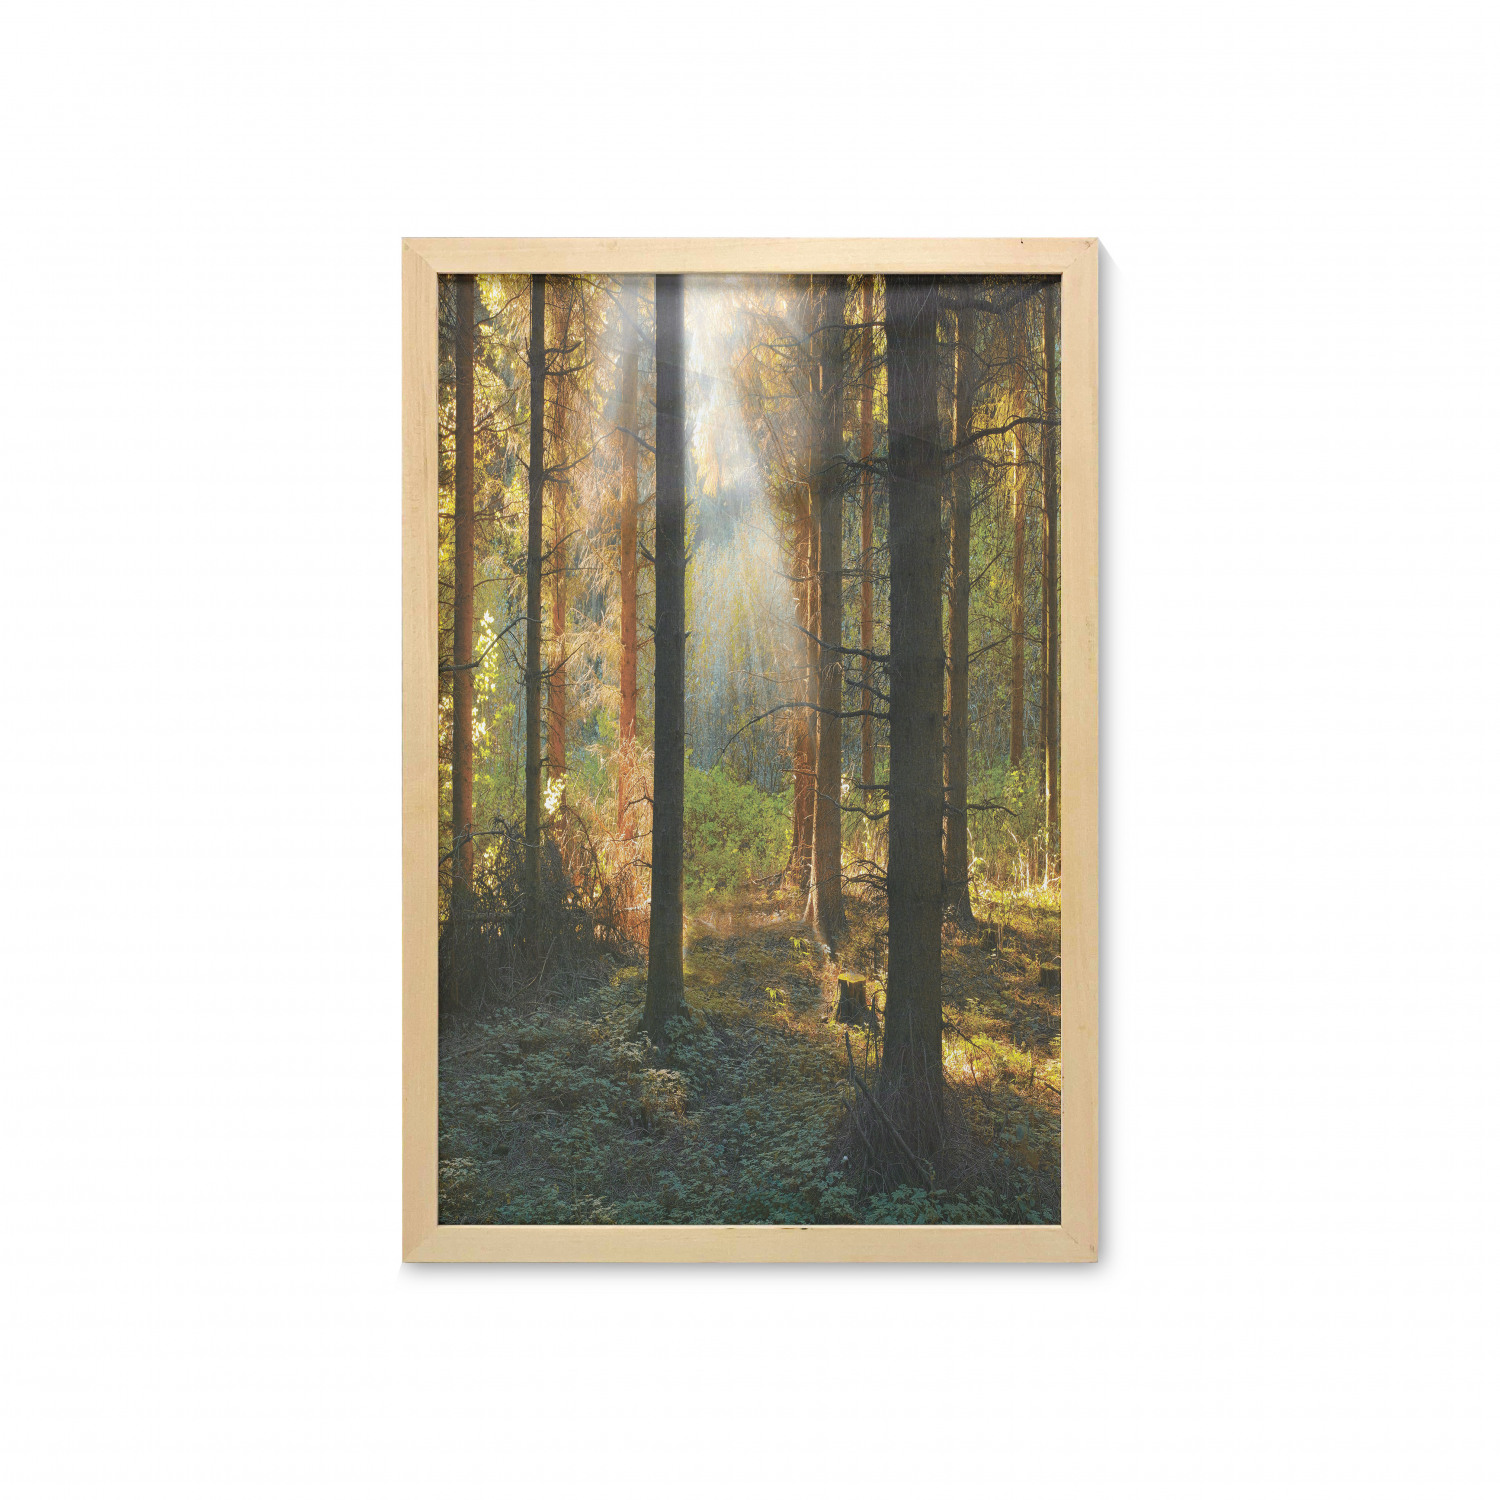 Forest Wall Art with Frame, Sunset View of Dark Pine Woodland in Autumn Foggy Scene Sunbeams Trunks Shadow, Printed Fabric Poster for Bathroom Living Room, 23" x 35", Orange Green, by Ambesonne - image 1 of 2